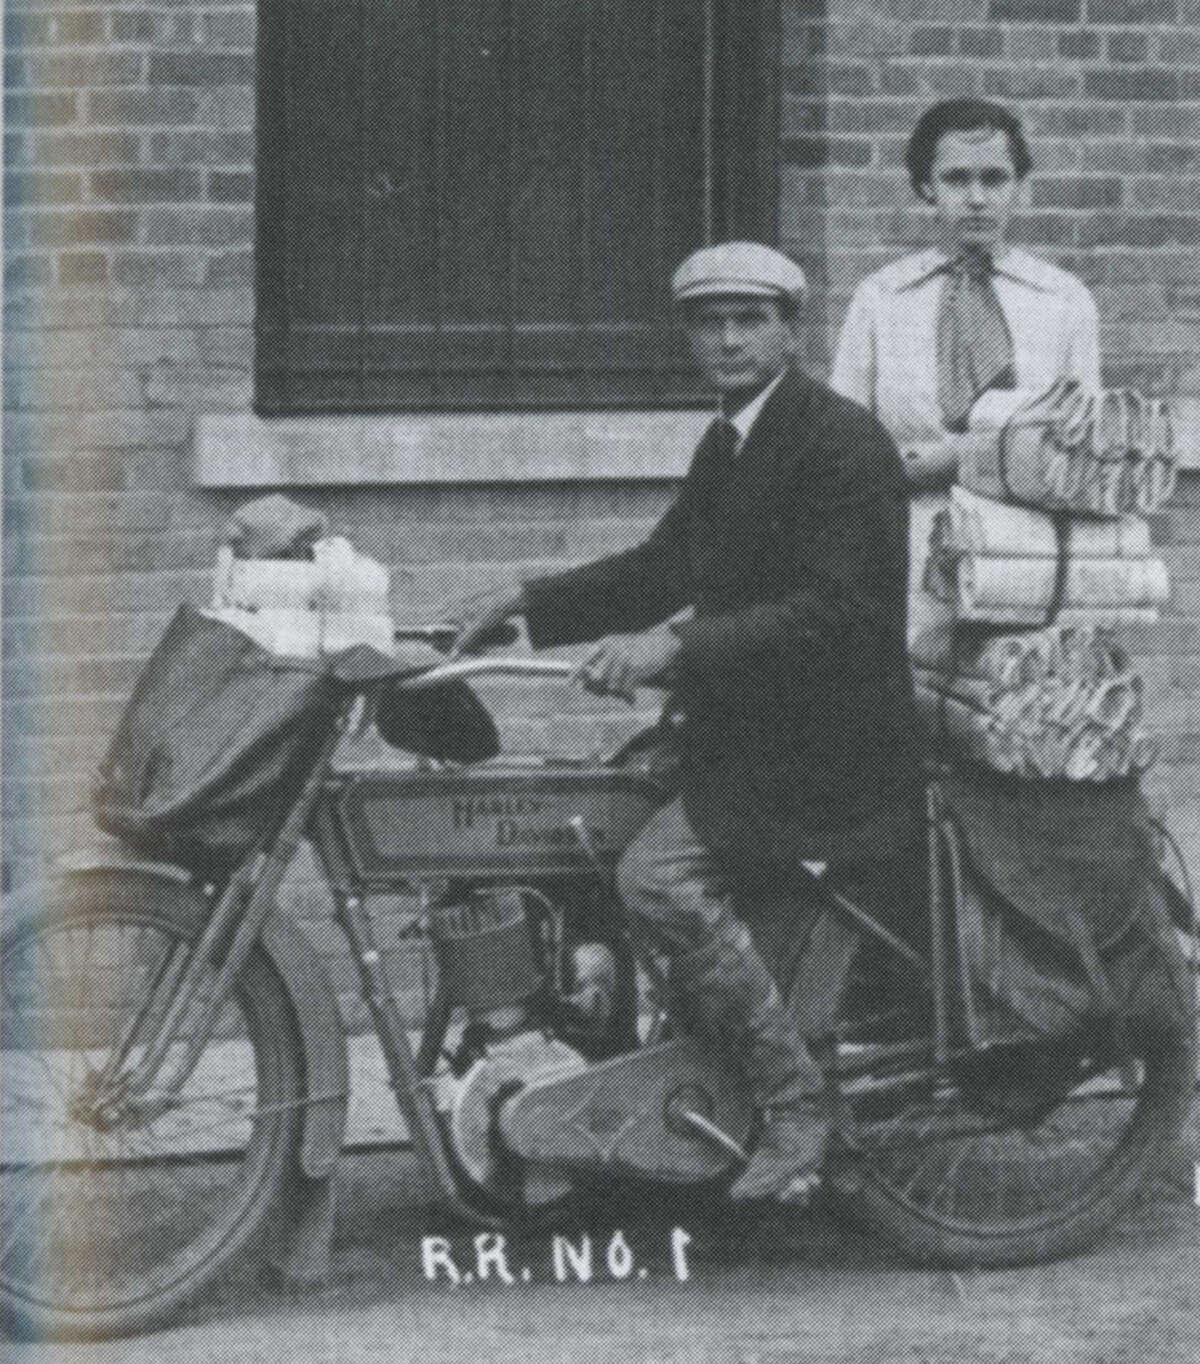 During the early 1900s, A.J. Chambers was Rural Route 1 mail carrier for the Plainview Post Office. He usually used a side car with his Harley Davidson motorcycle to carry the extra mail. When it was cold or muddy, Chambers used a horse and buggy to deliver mail along his rural route. He is shown with his daughter, Abbie Chambers, in the photo from about 1911 which was provided by members of his family. Chambers was on vacation from the post office with his wife and an all-girls church quartet when their auto caught in a flash flood outside Carlsbad, New Mexico. Chambers and two of the girls, including his 17-year-old daughter Eunice, drowned. Chamber’s wife and the other two girls were pulled from the raging torrent and survived.